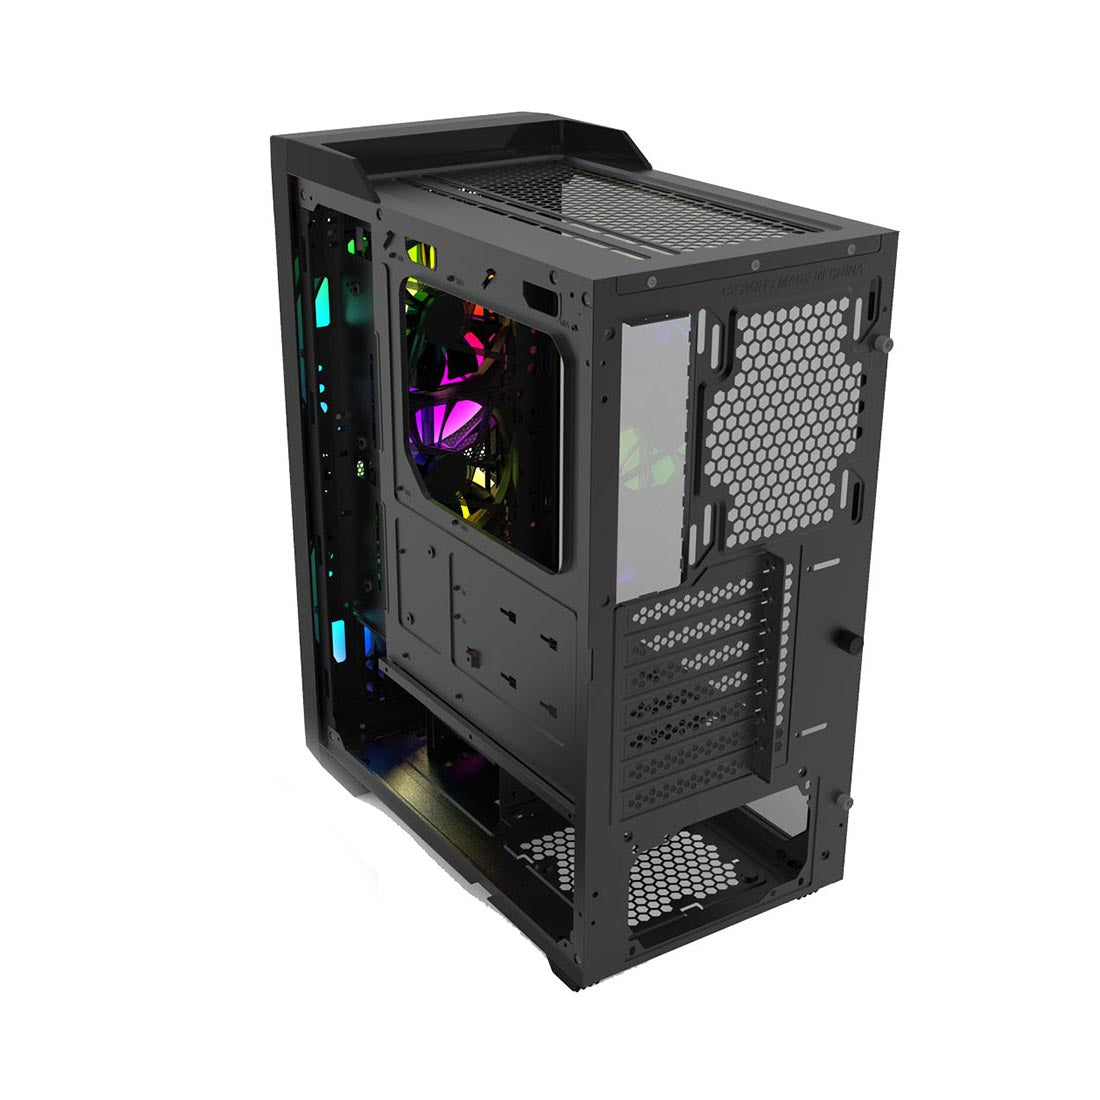 Gamdias ATHENA M1 Mid Tower PC Case Cabinet with 3 120mm ARGB Fans and Dust Filter